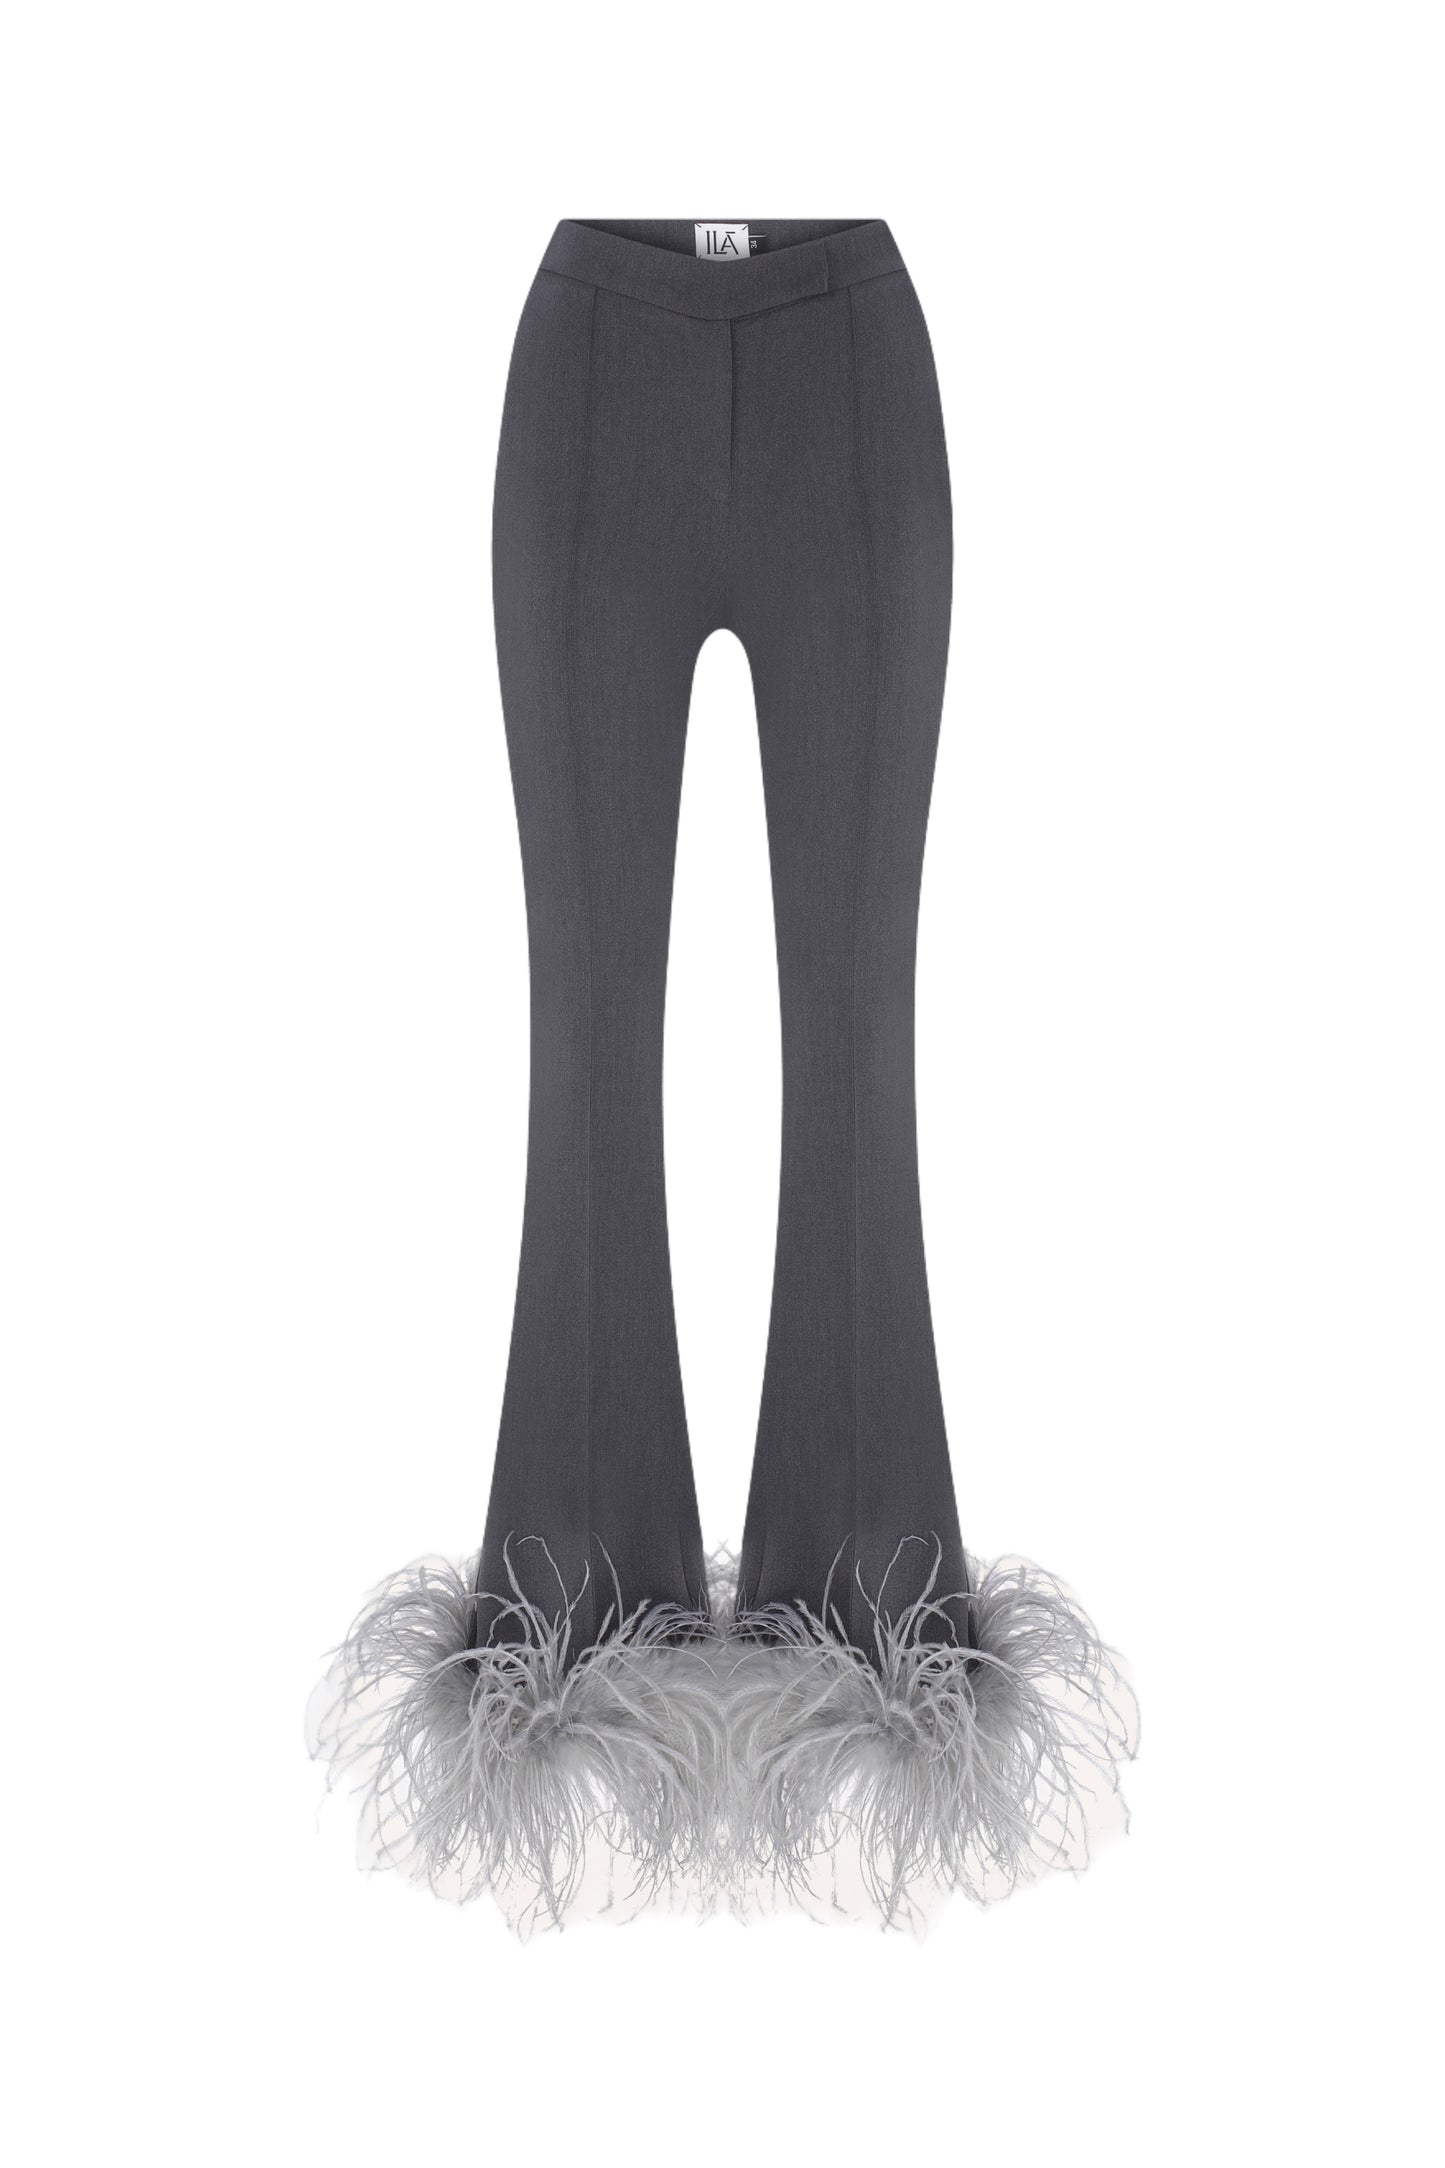 Neo - Grey Flare Trousers With Feather Details